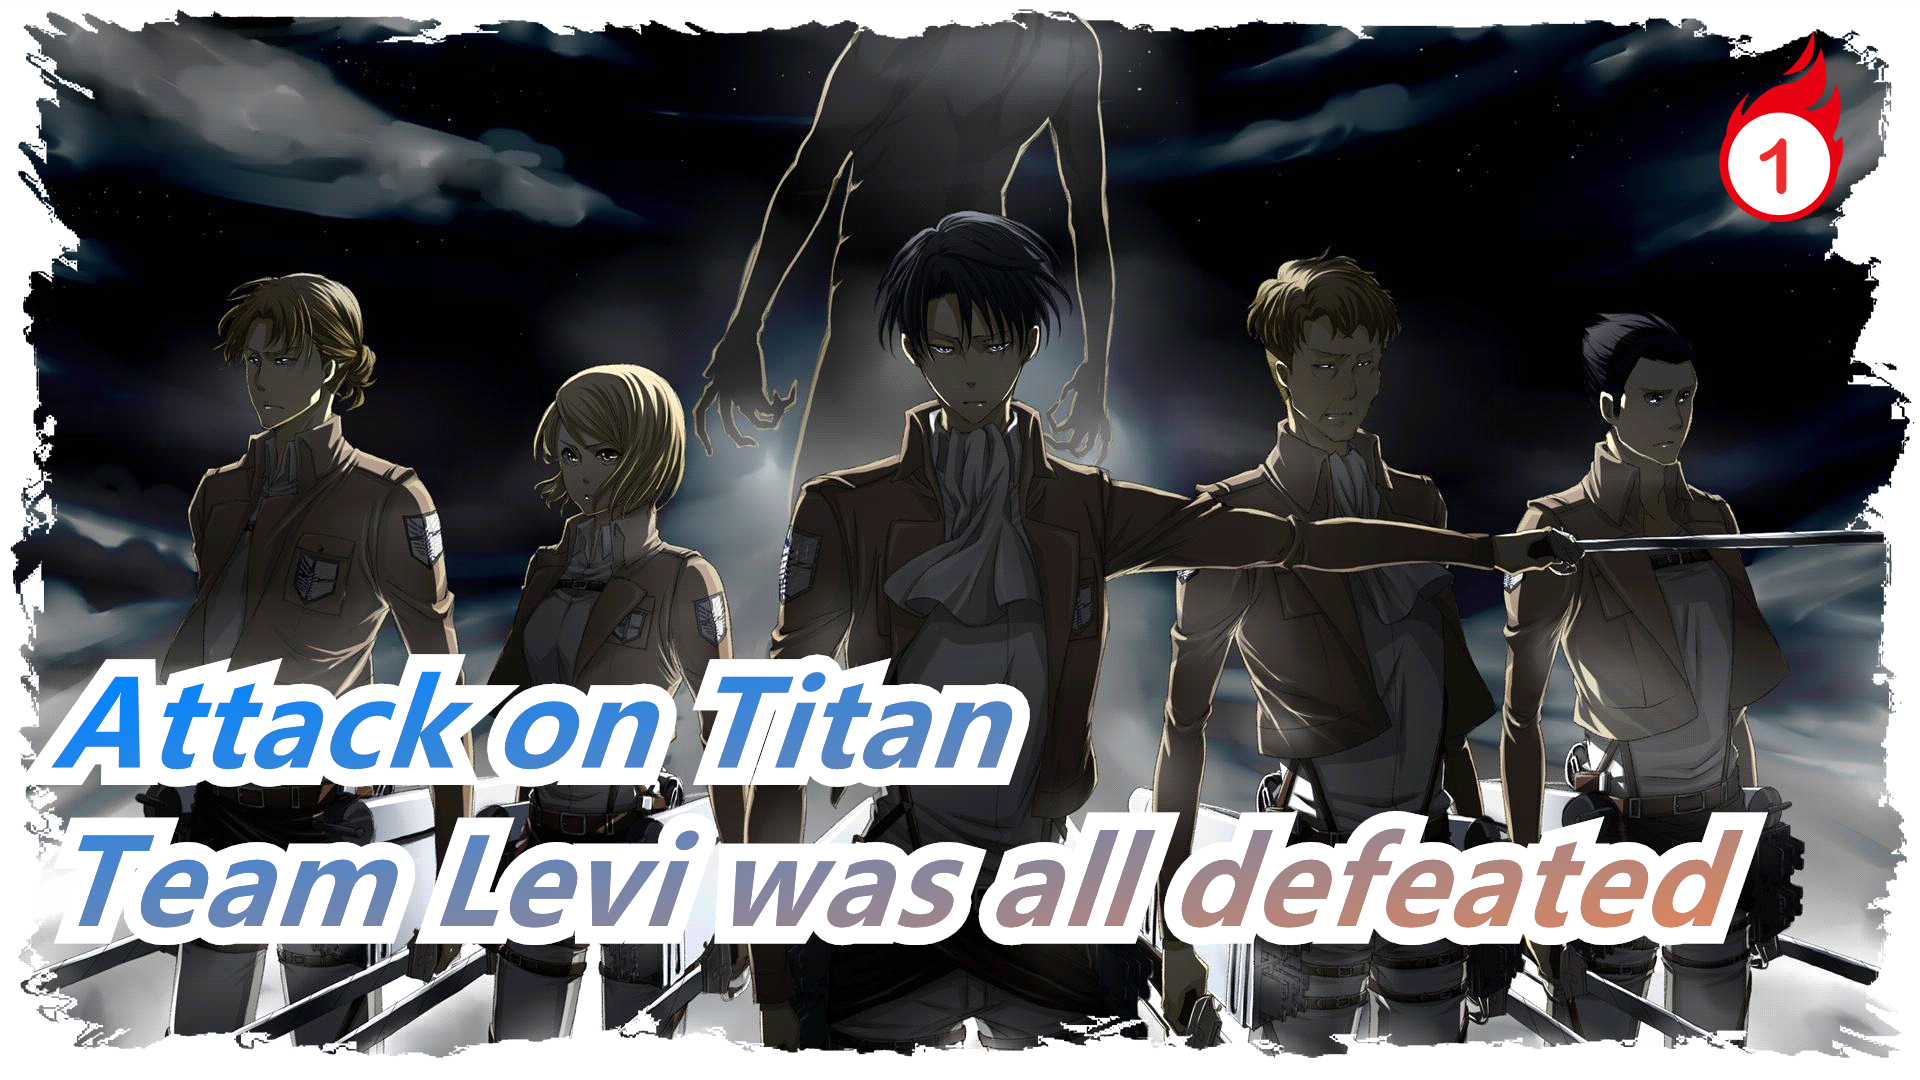 Attack on Titan|Team Levi was all defeated. Eren is captured by Ani. Levi  cut down the Titaness!_1 - Bilibili